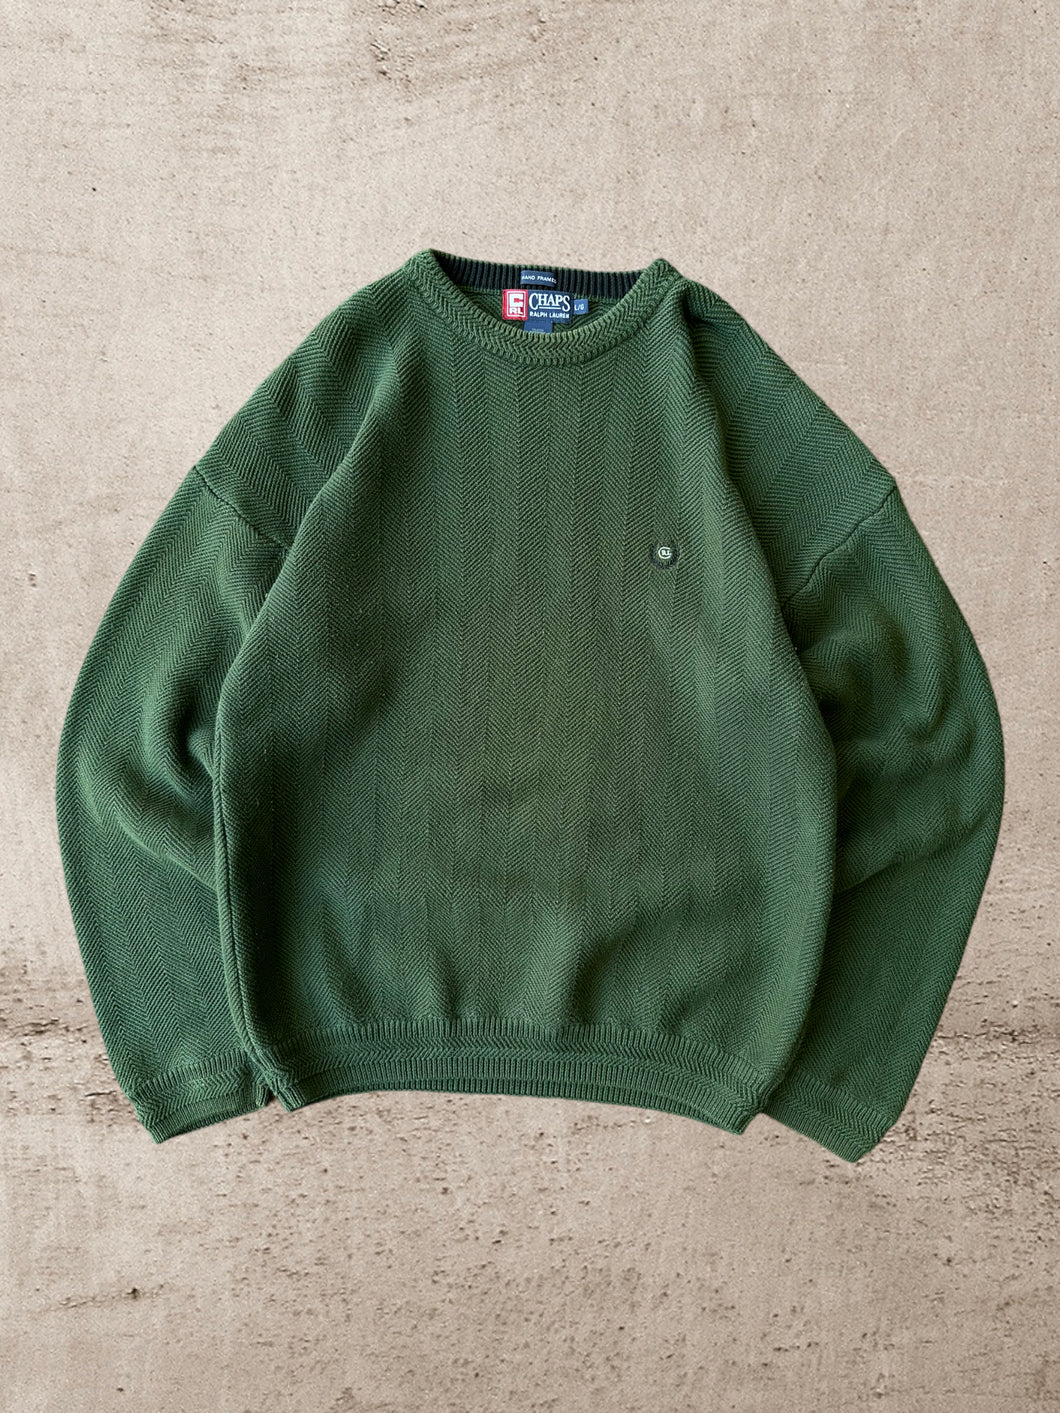 Vintage Chaps Green Knit Sweater - Large